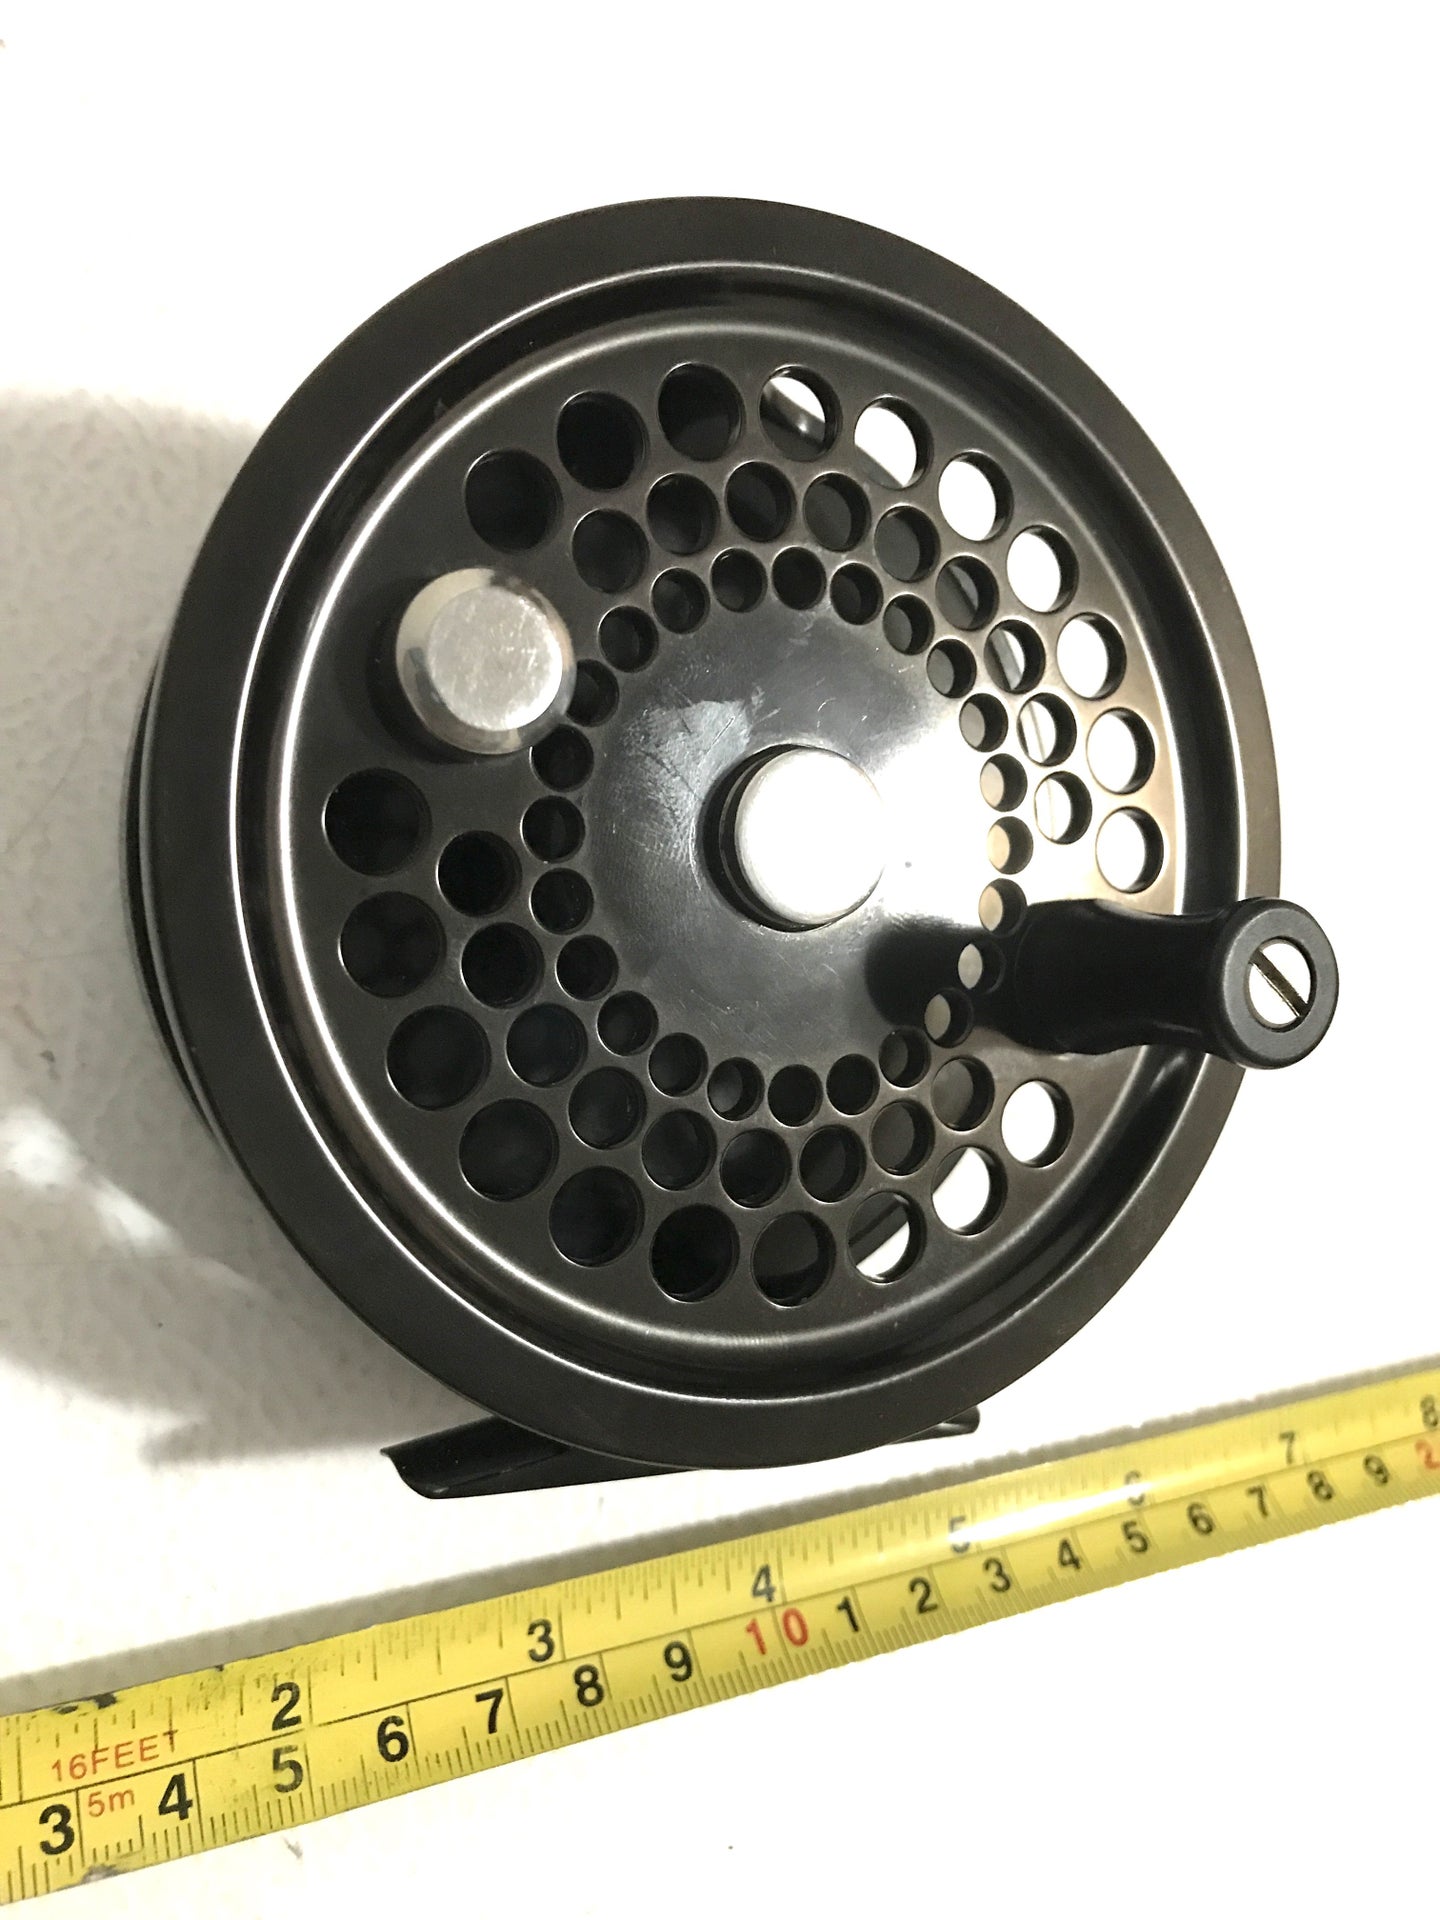 Southern California - For Sale Penn International Gold Fly Reel